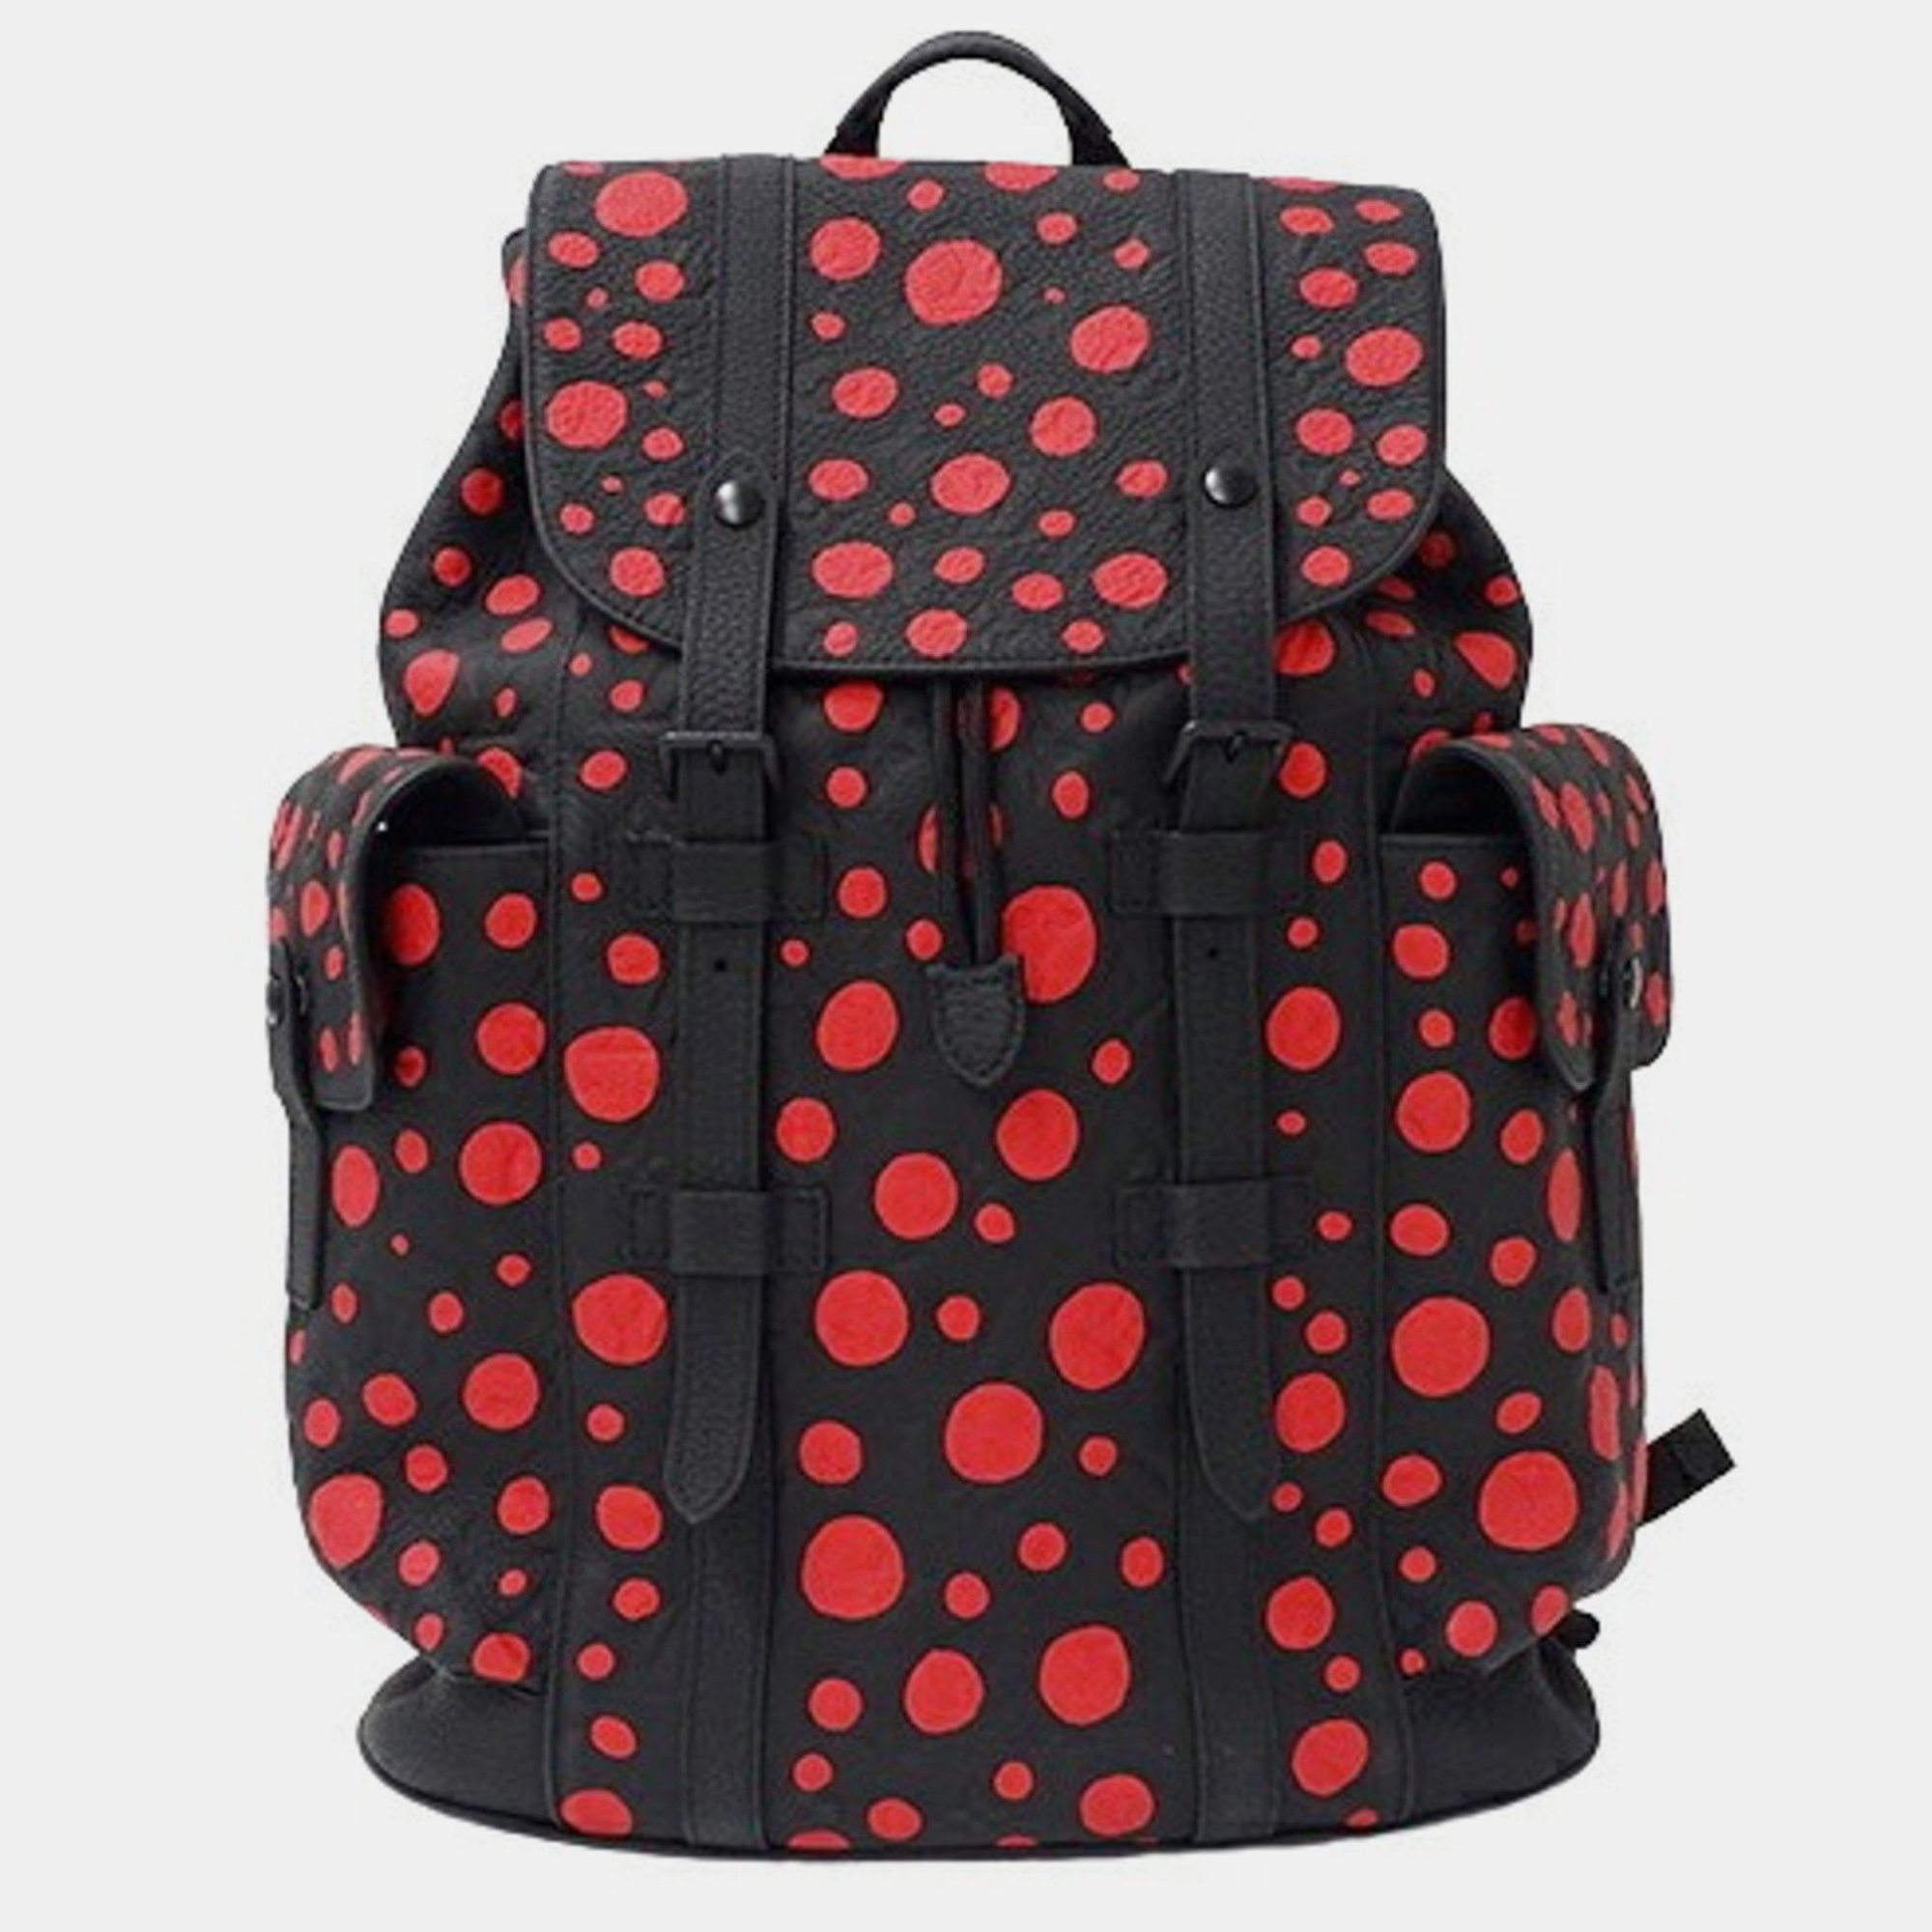 Louis vuitton black/red yayoi kusama painted dots taurillon leather mm christopher backpack